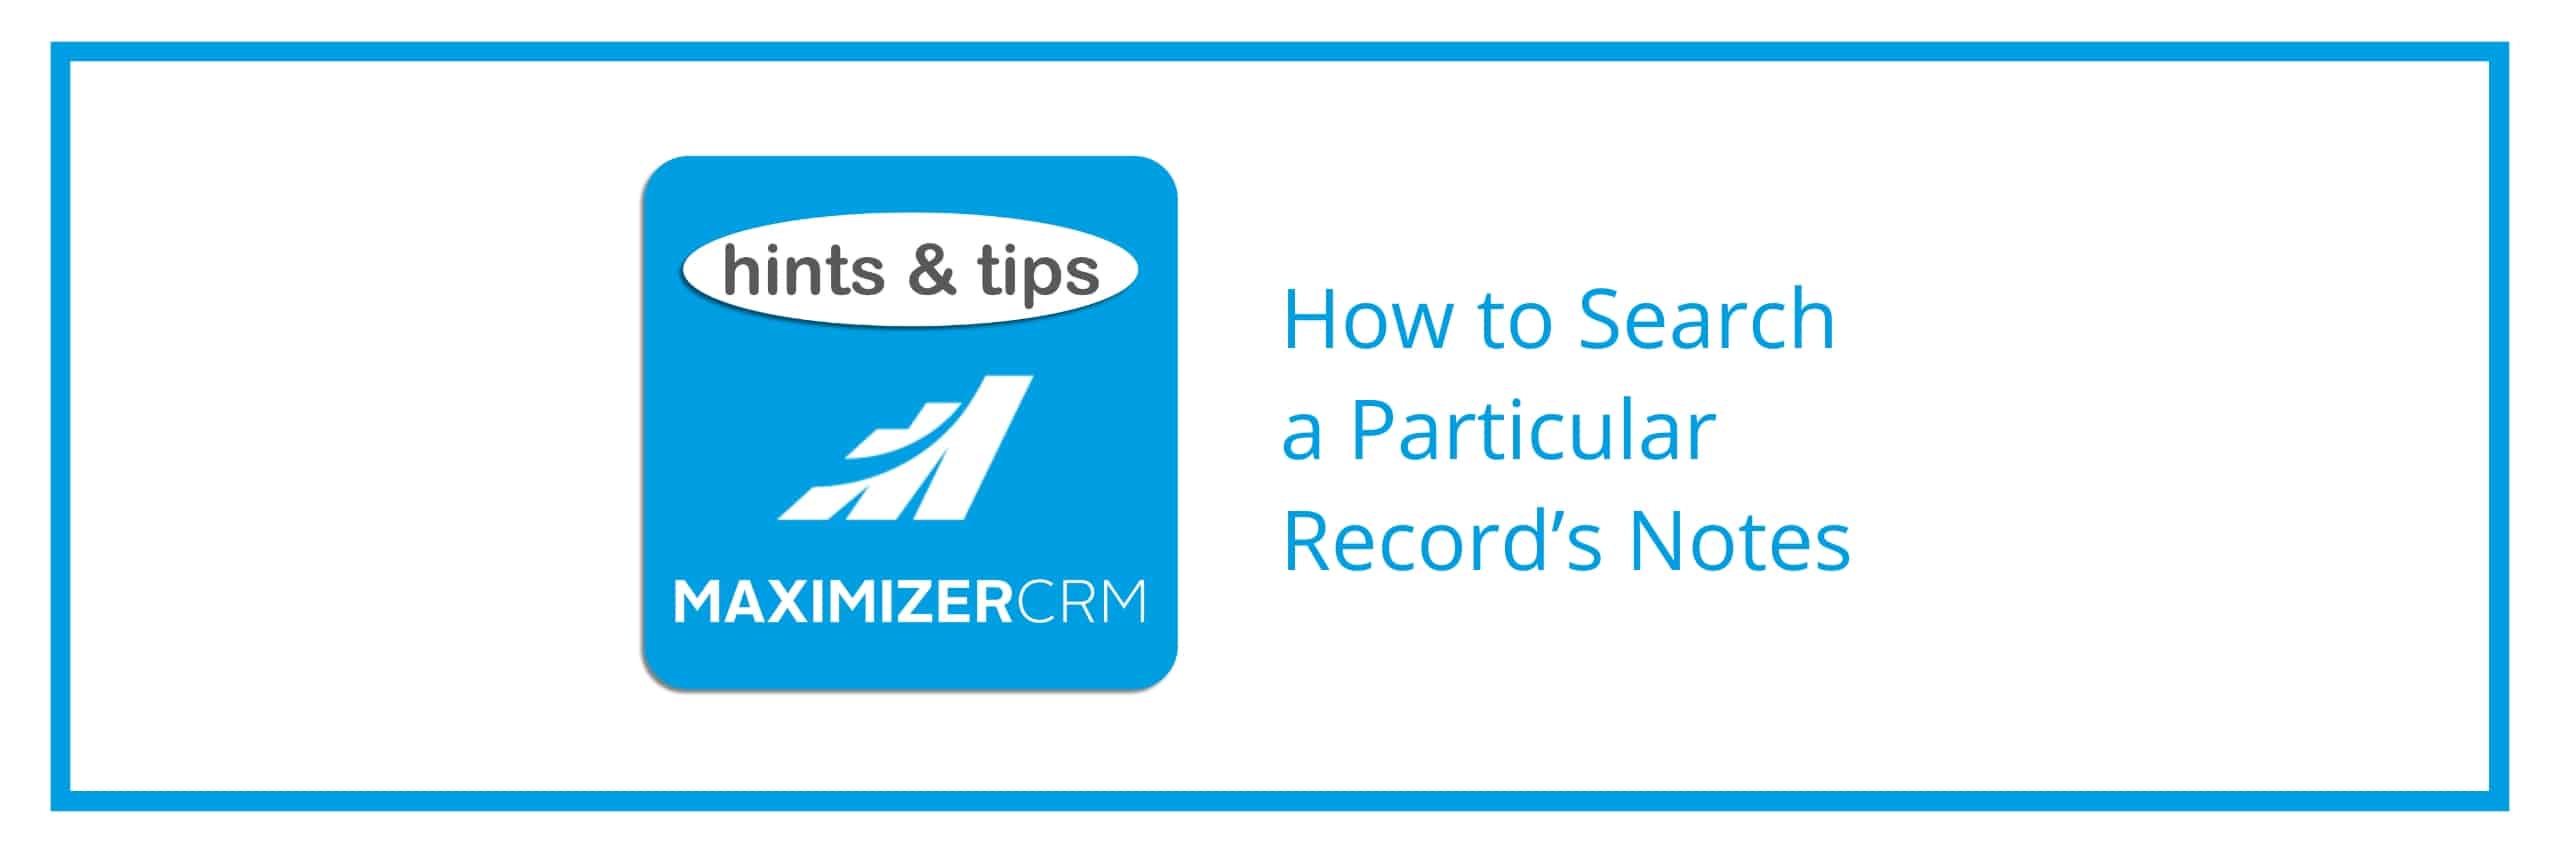 Hints & Tips - How to Search a Particular Record’s Notes